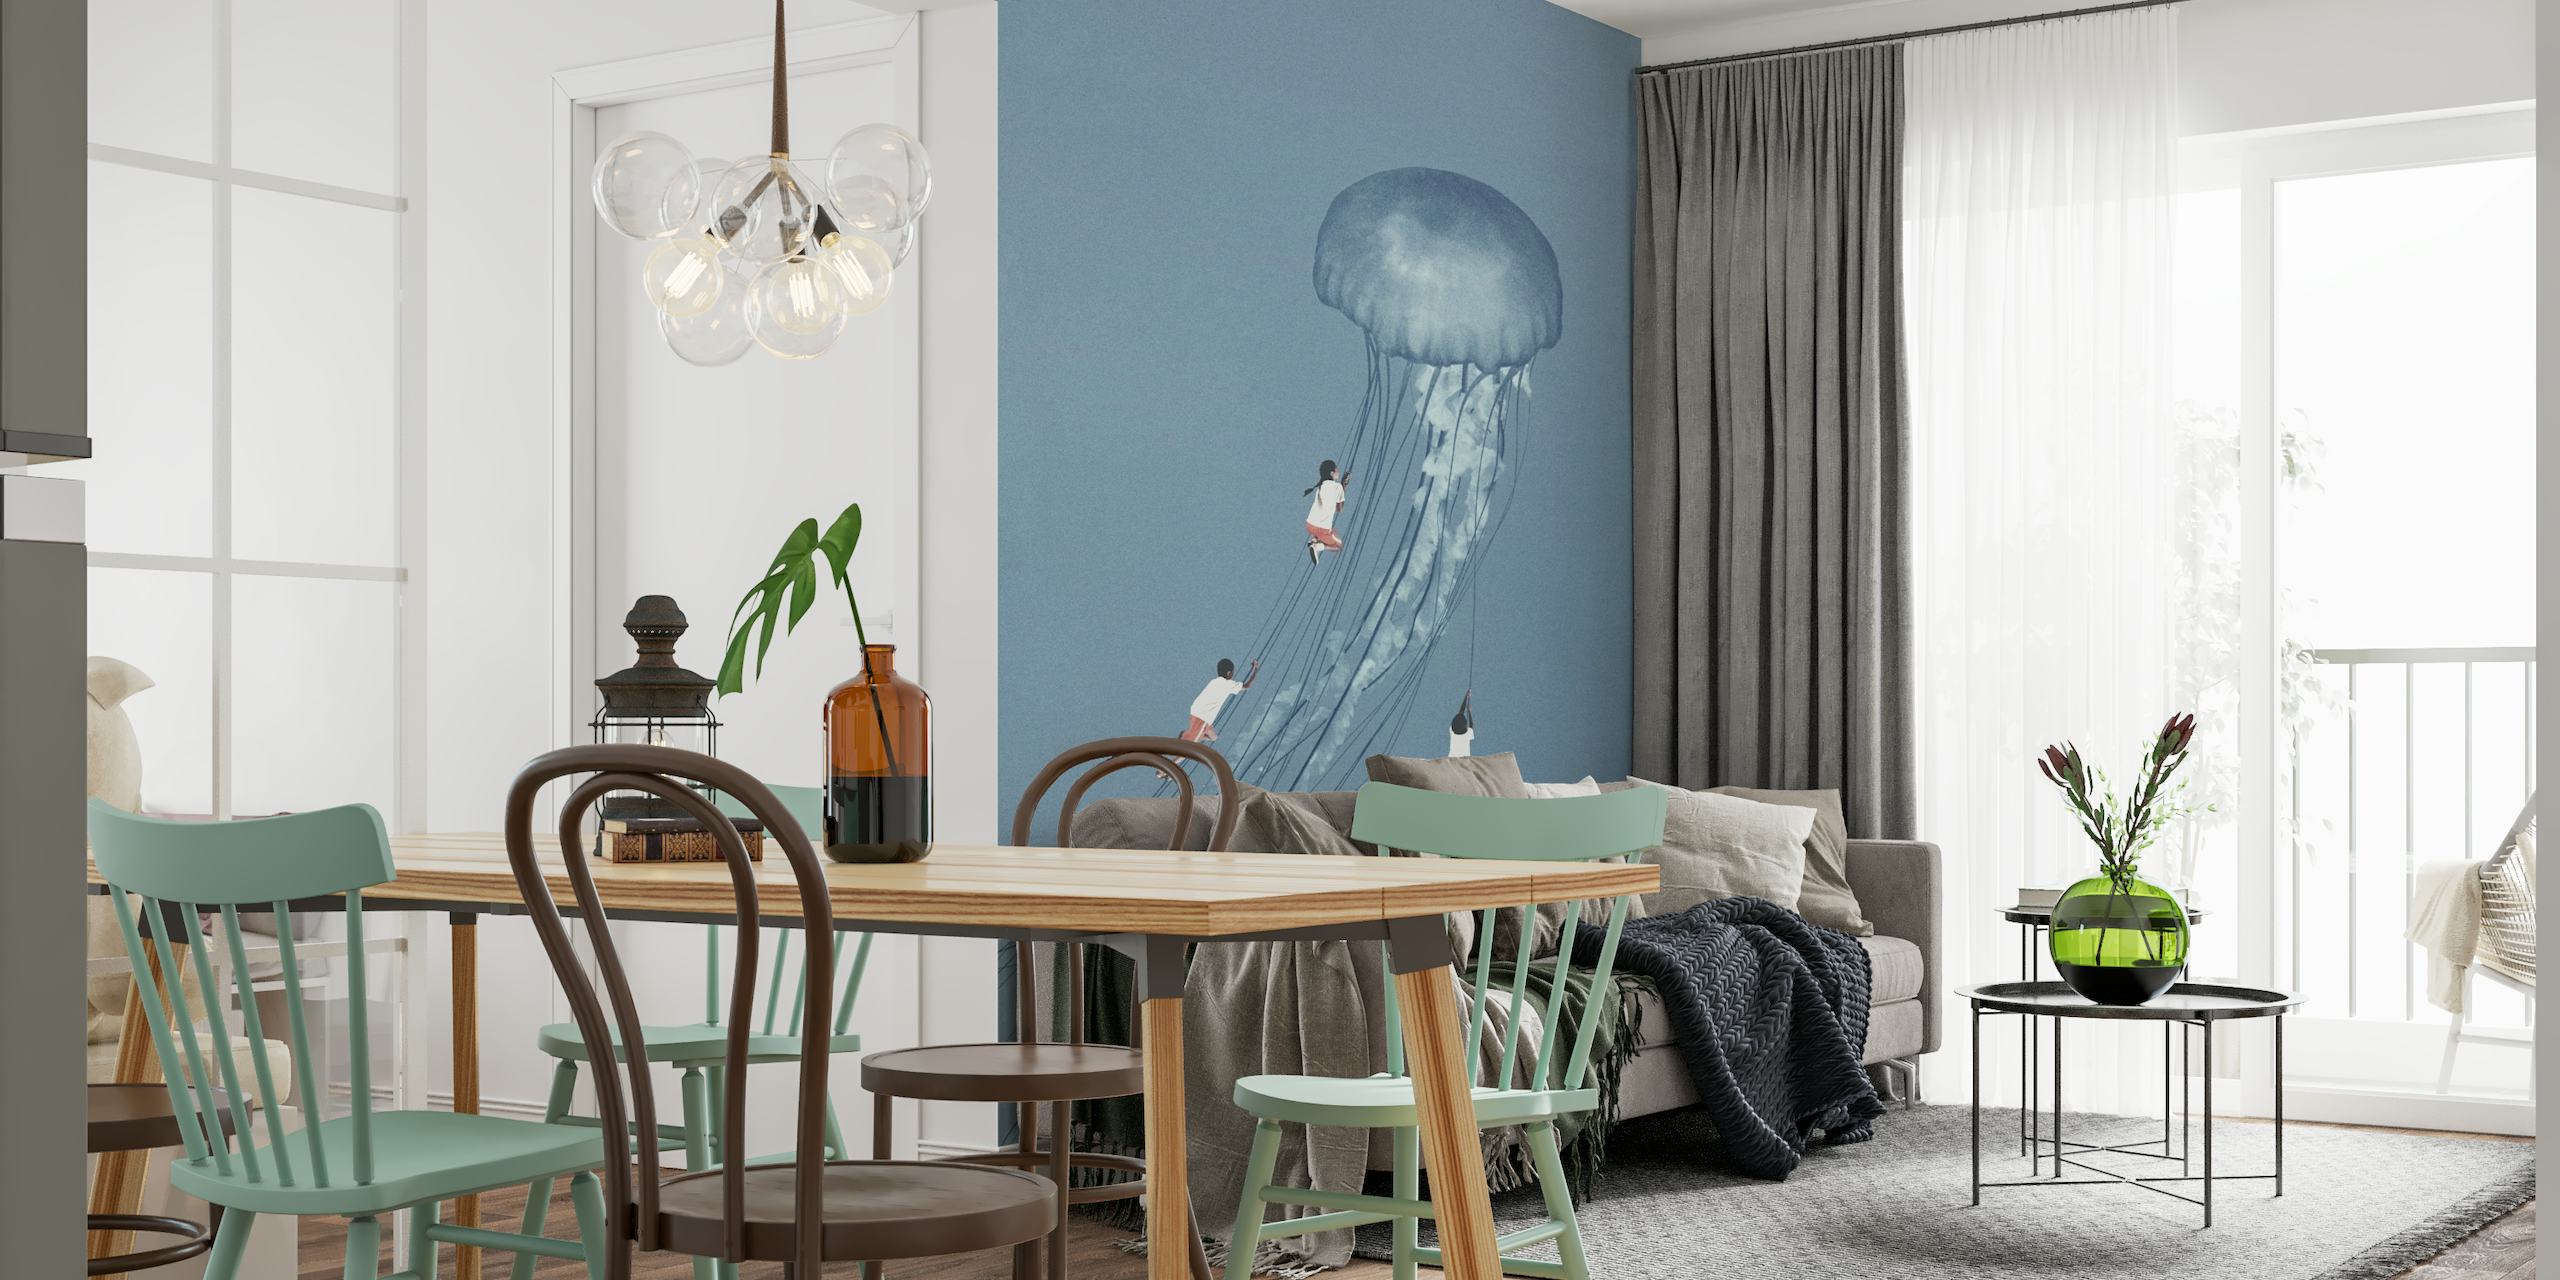 Surreal jellyfish with figures wall mural